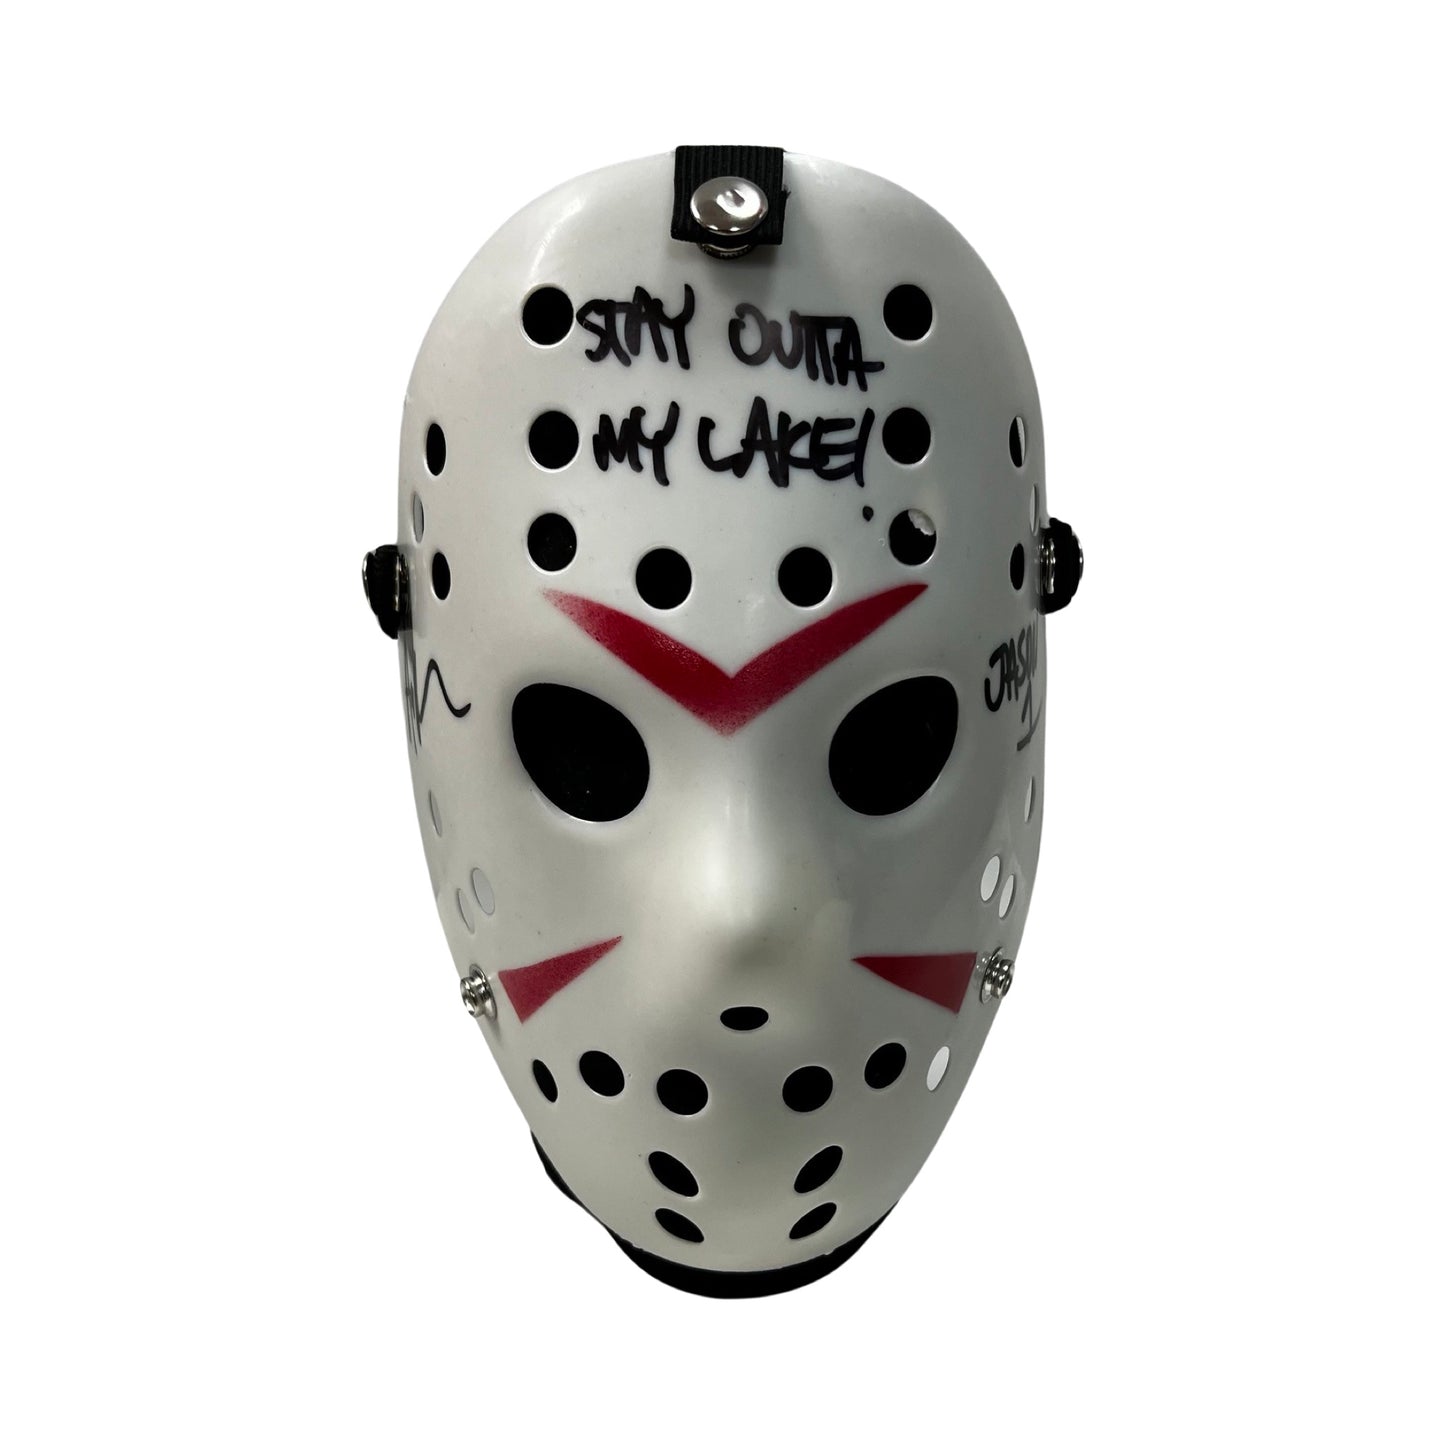 Ari Lehman Autographed Jason Voorhees Friday the 13th White Mask “Stay Outta My Lake! Jason 1” Inscriptions Steiner CX